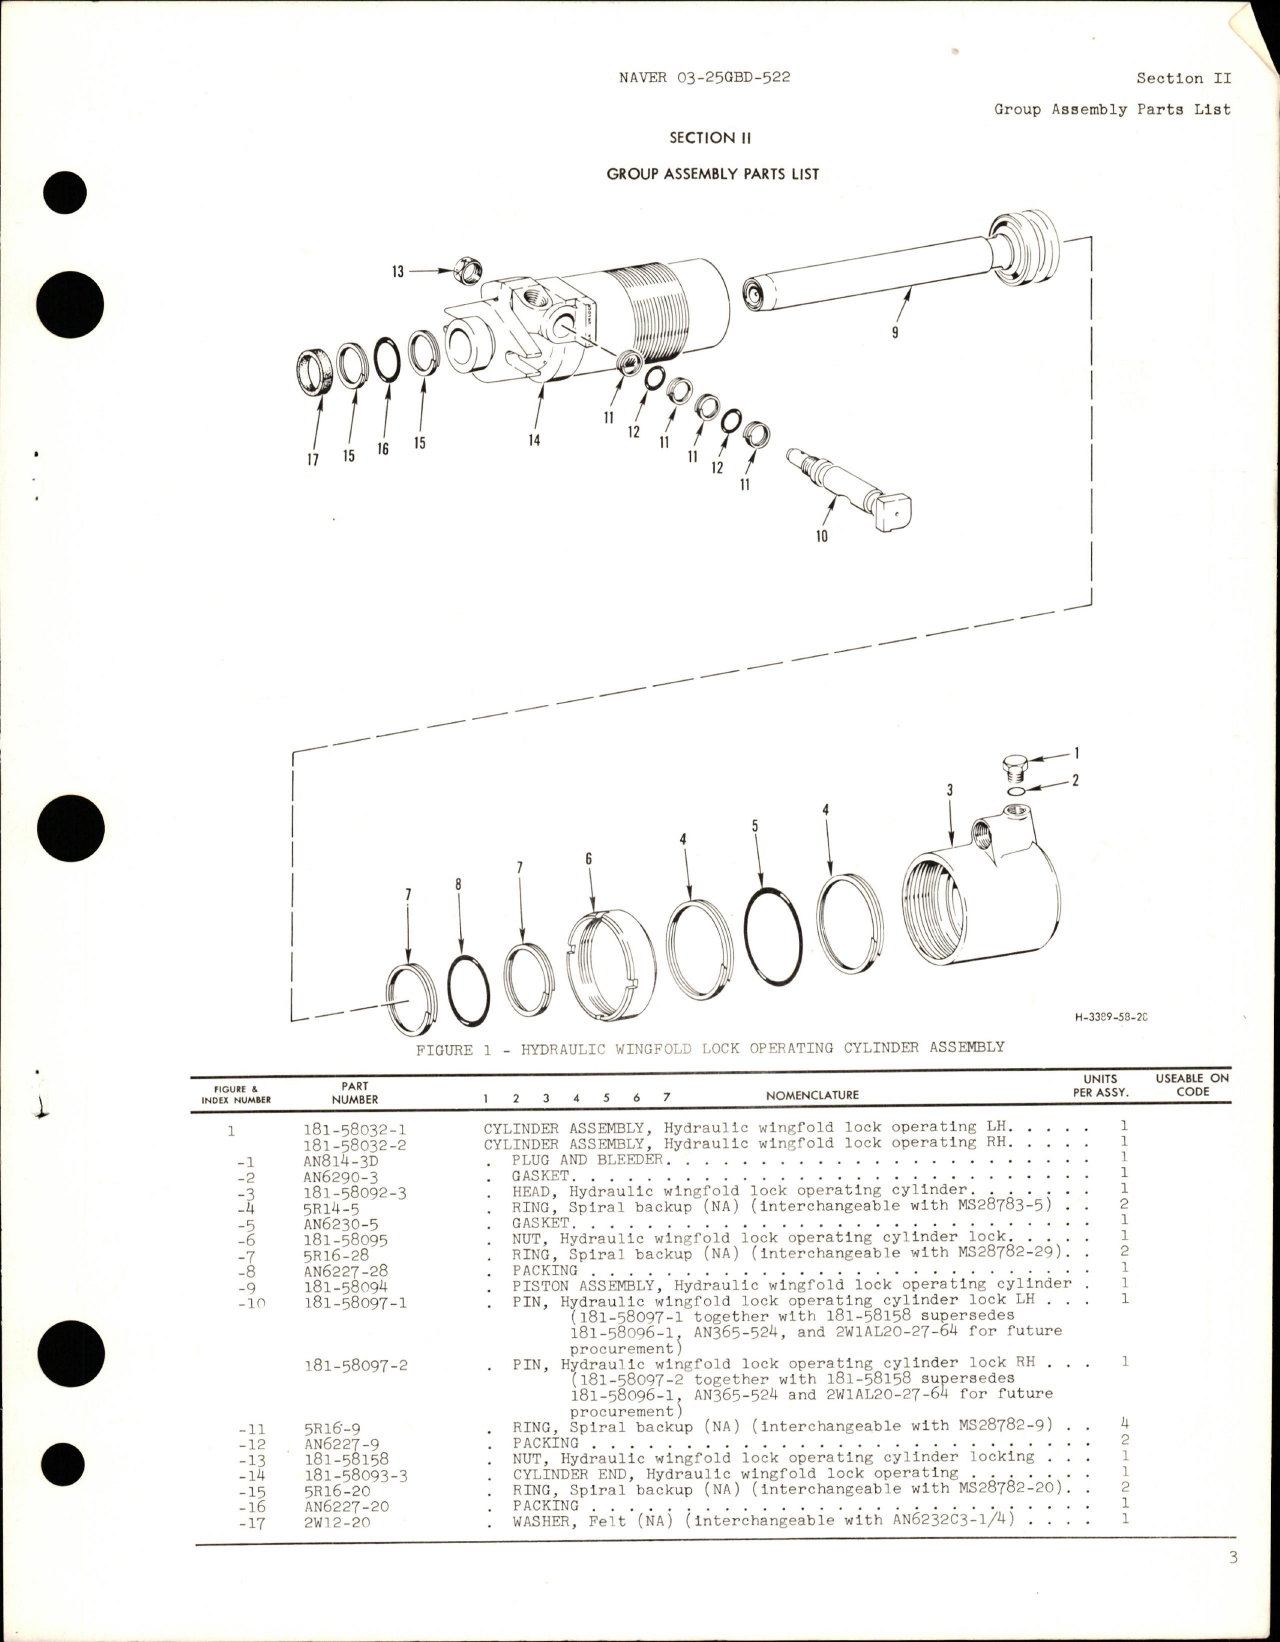 Sample page 5 from AirCorps Library document: Illustrated Parts Breakdown for Hydraulic Wing Fold Lock Operating Cylinder Assembly - Part 181-58032-1 and 181-58032-2